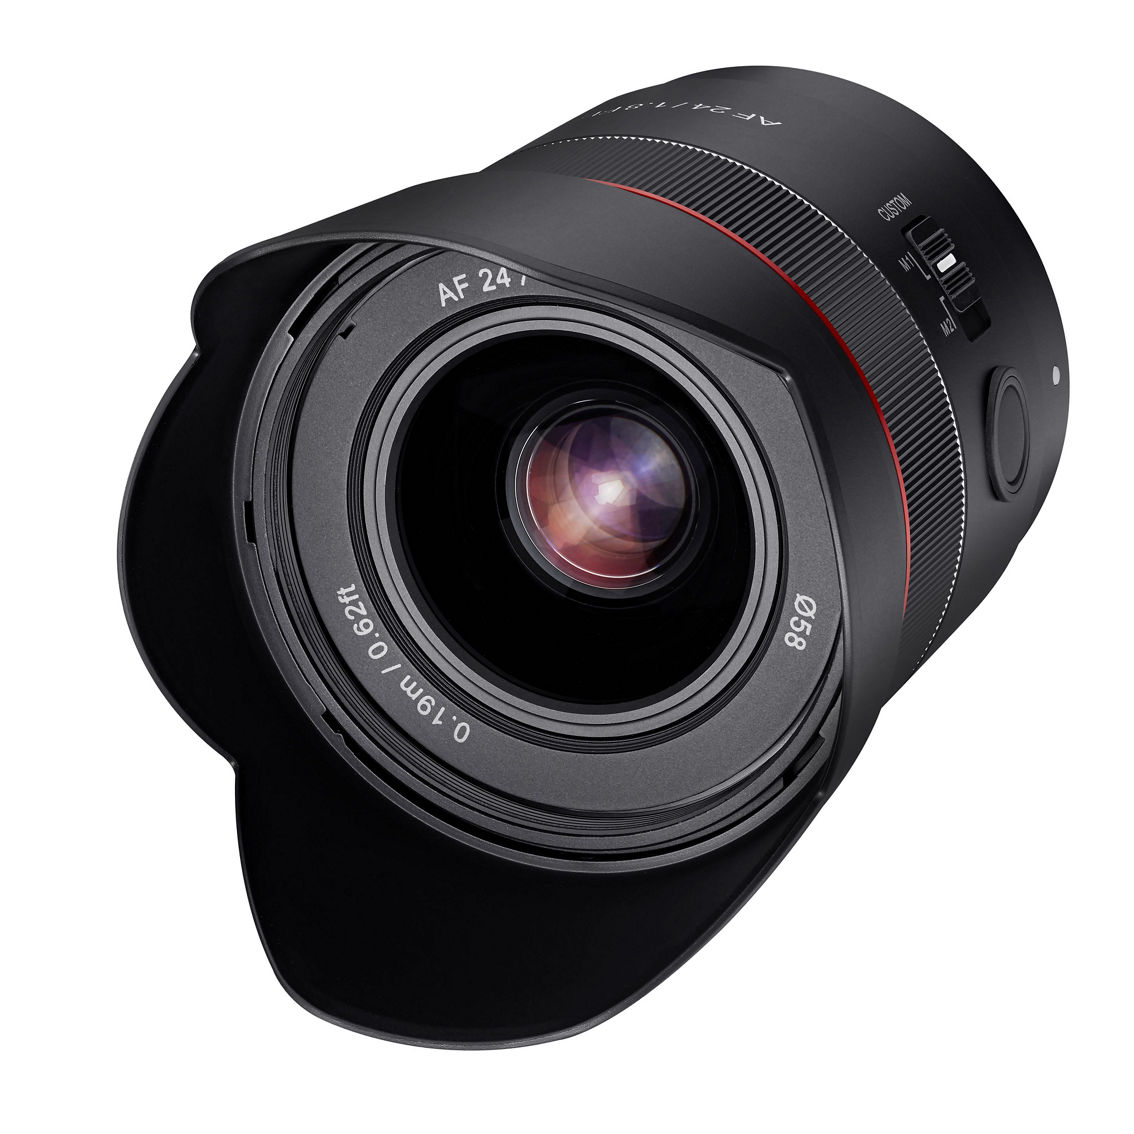 Rokinon 24mm F1.8 AF Compact Full Frame Wide Angle Lens for Sony E - Image 4 of 5